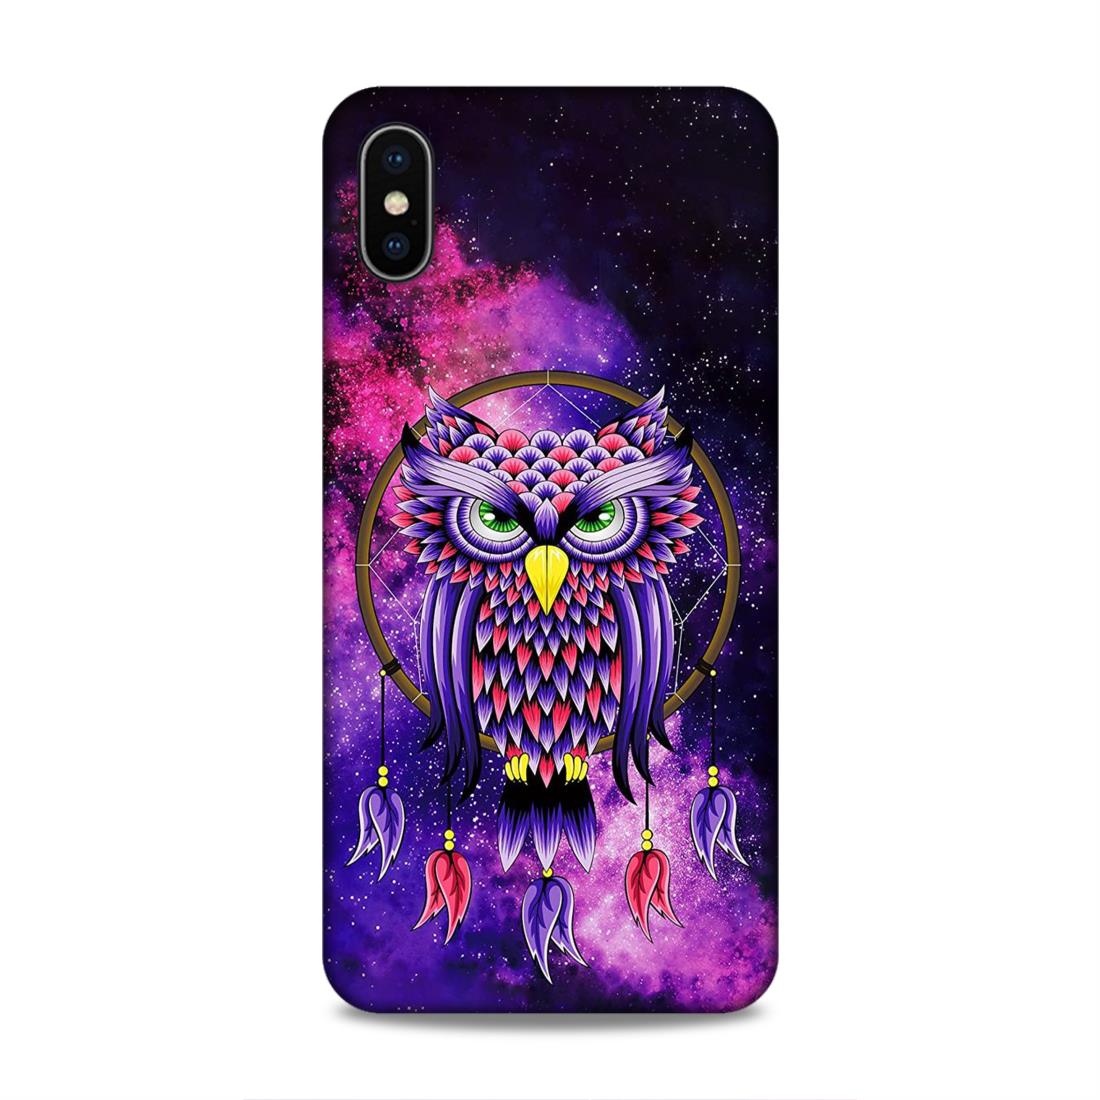 Dreamcatcher Owl Hard Back Case For Apple iPhone XS Max